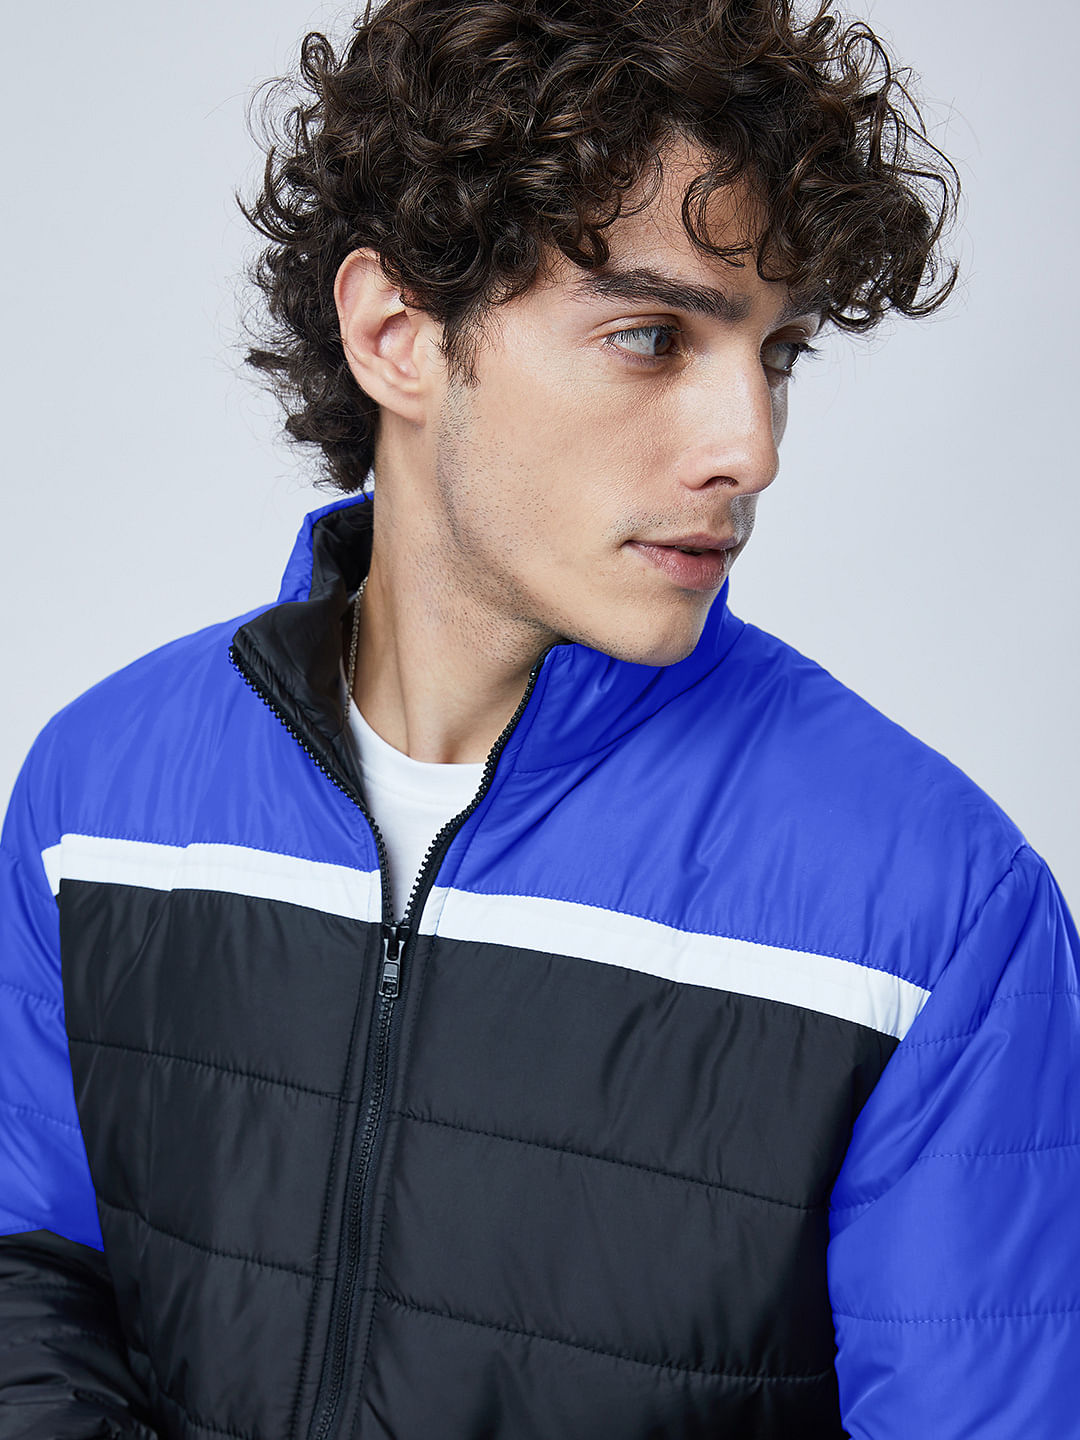 Buy Official Solids: Colorblock Puffer Jackets Online